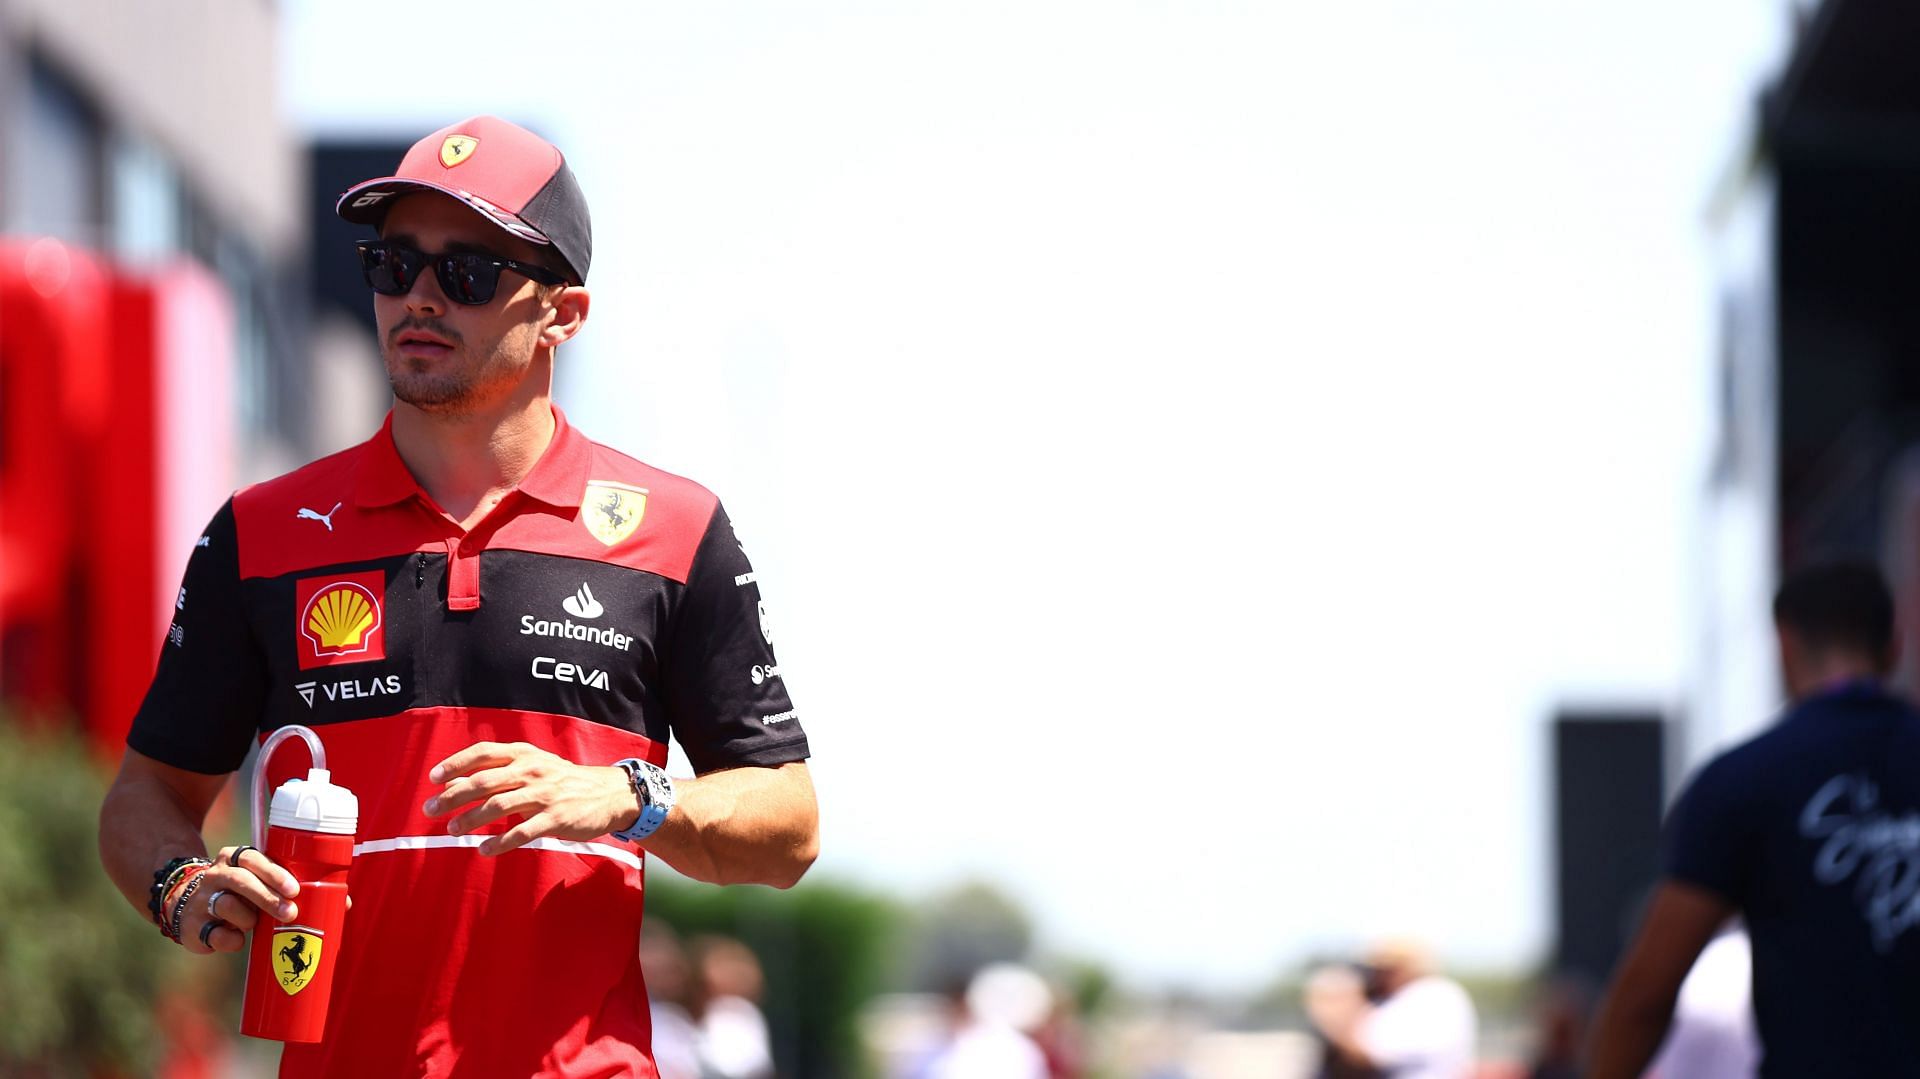 Charles Leclerc arrives at the paddock for the 2022 F1 Grand Prix of France - Previews